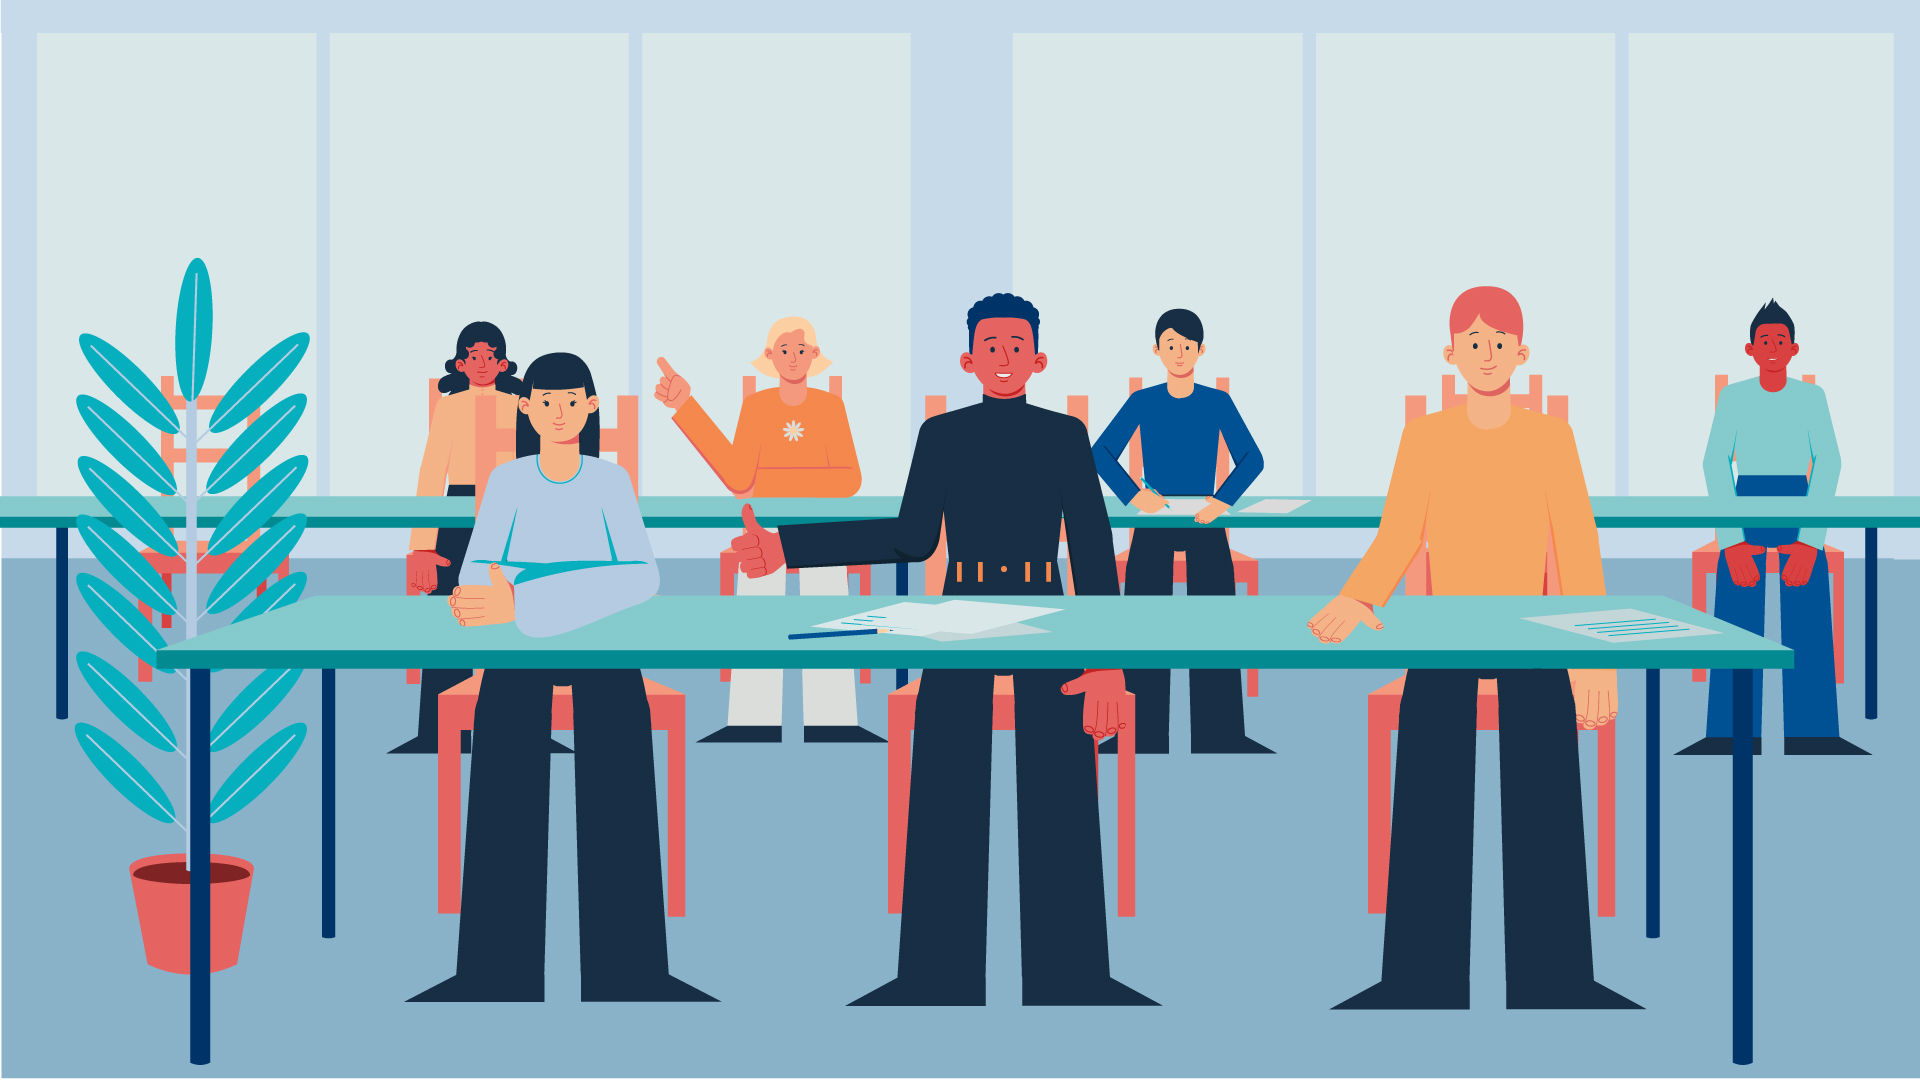 Illustration of students sitting in a classroom.